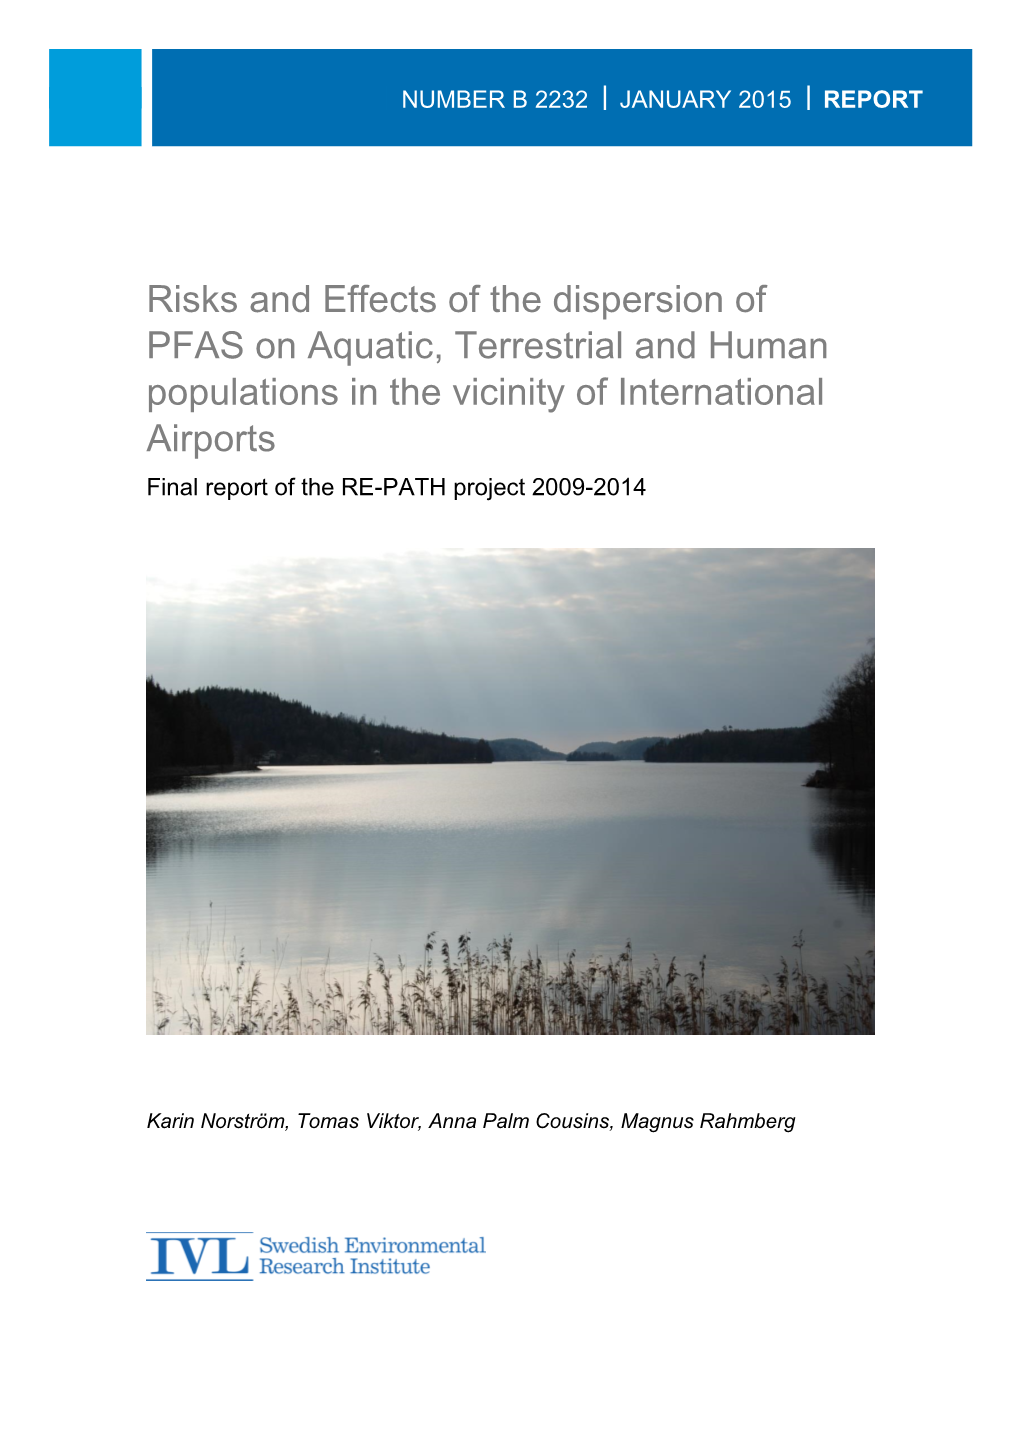 Risks and Effects of the Dispersion of PFAS on Aquatic, Terrestrial And